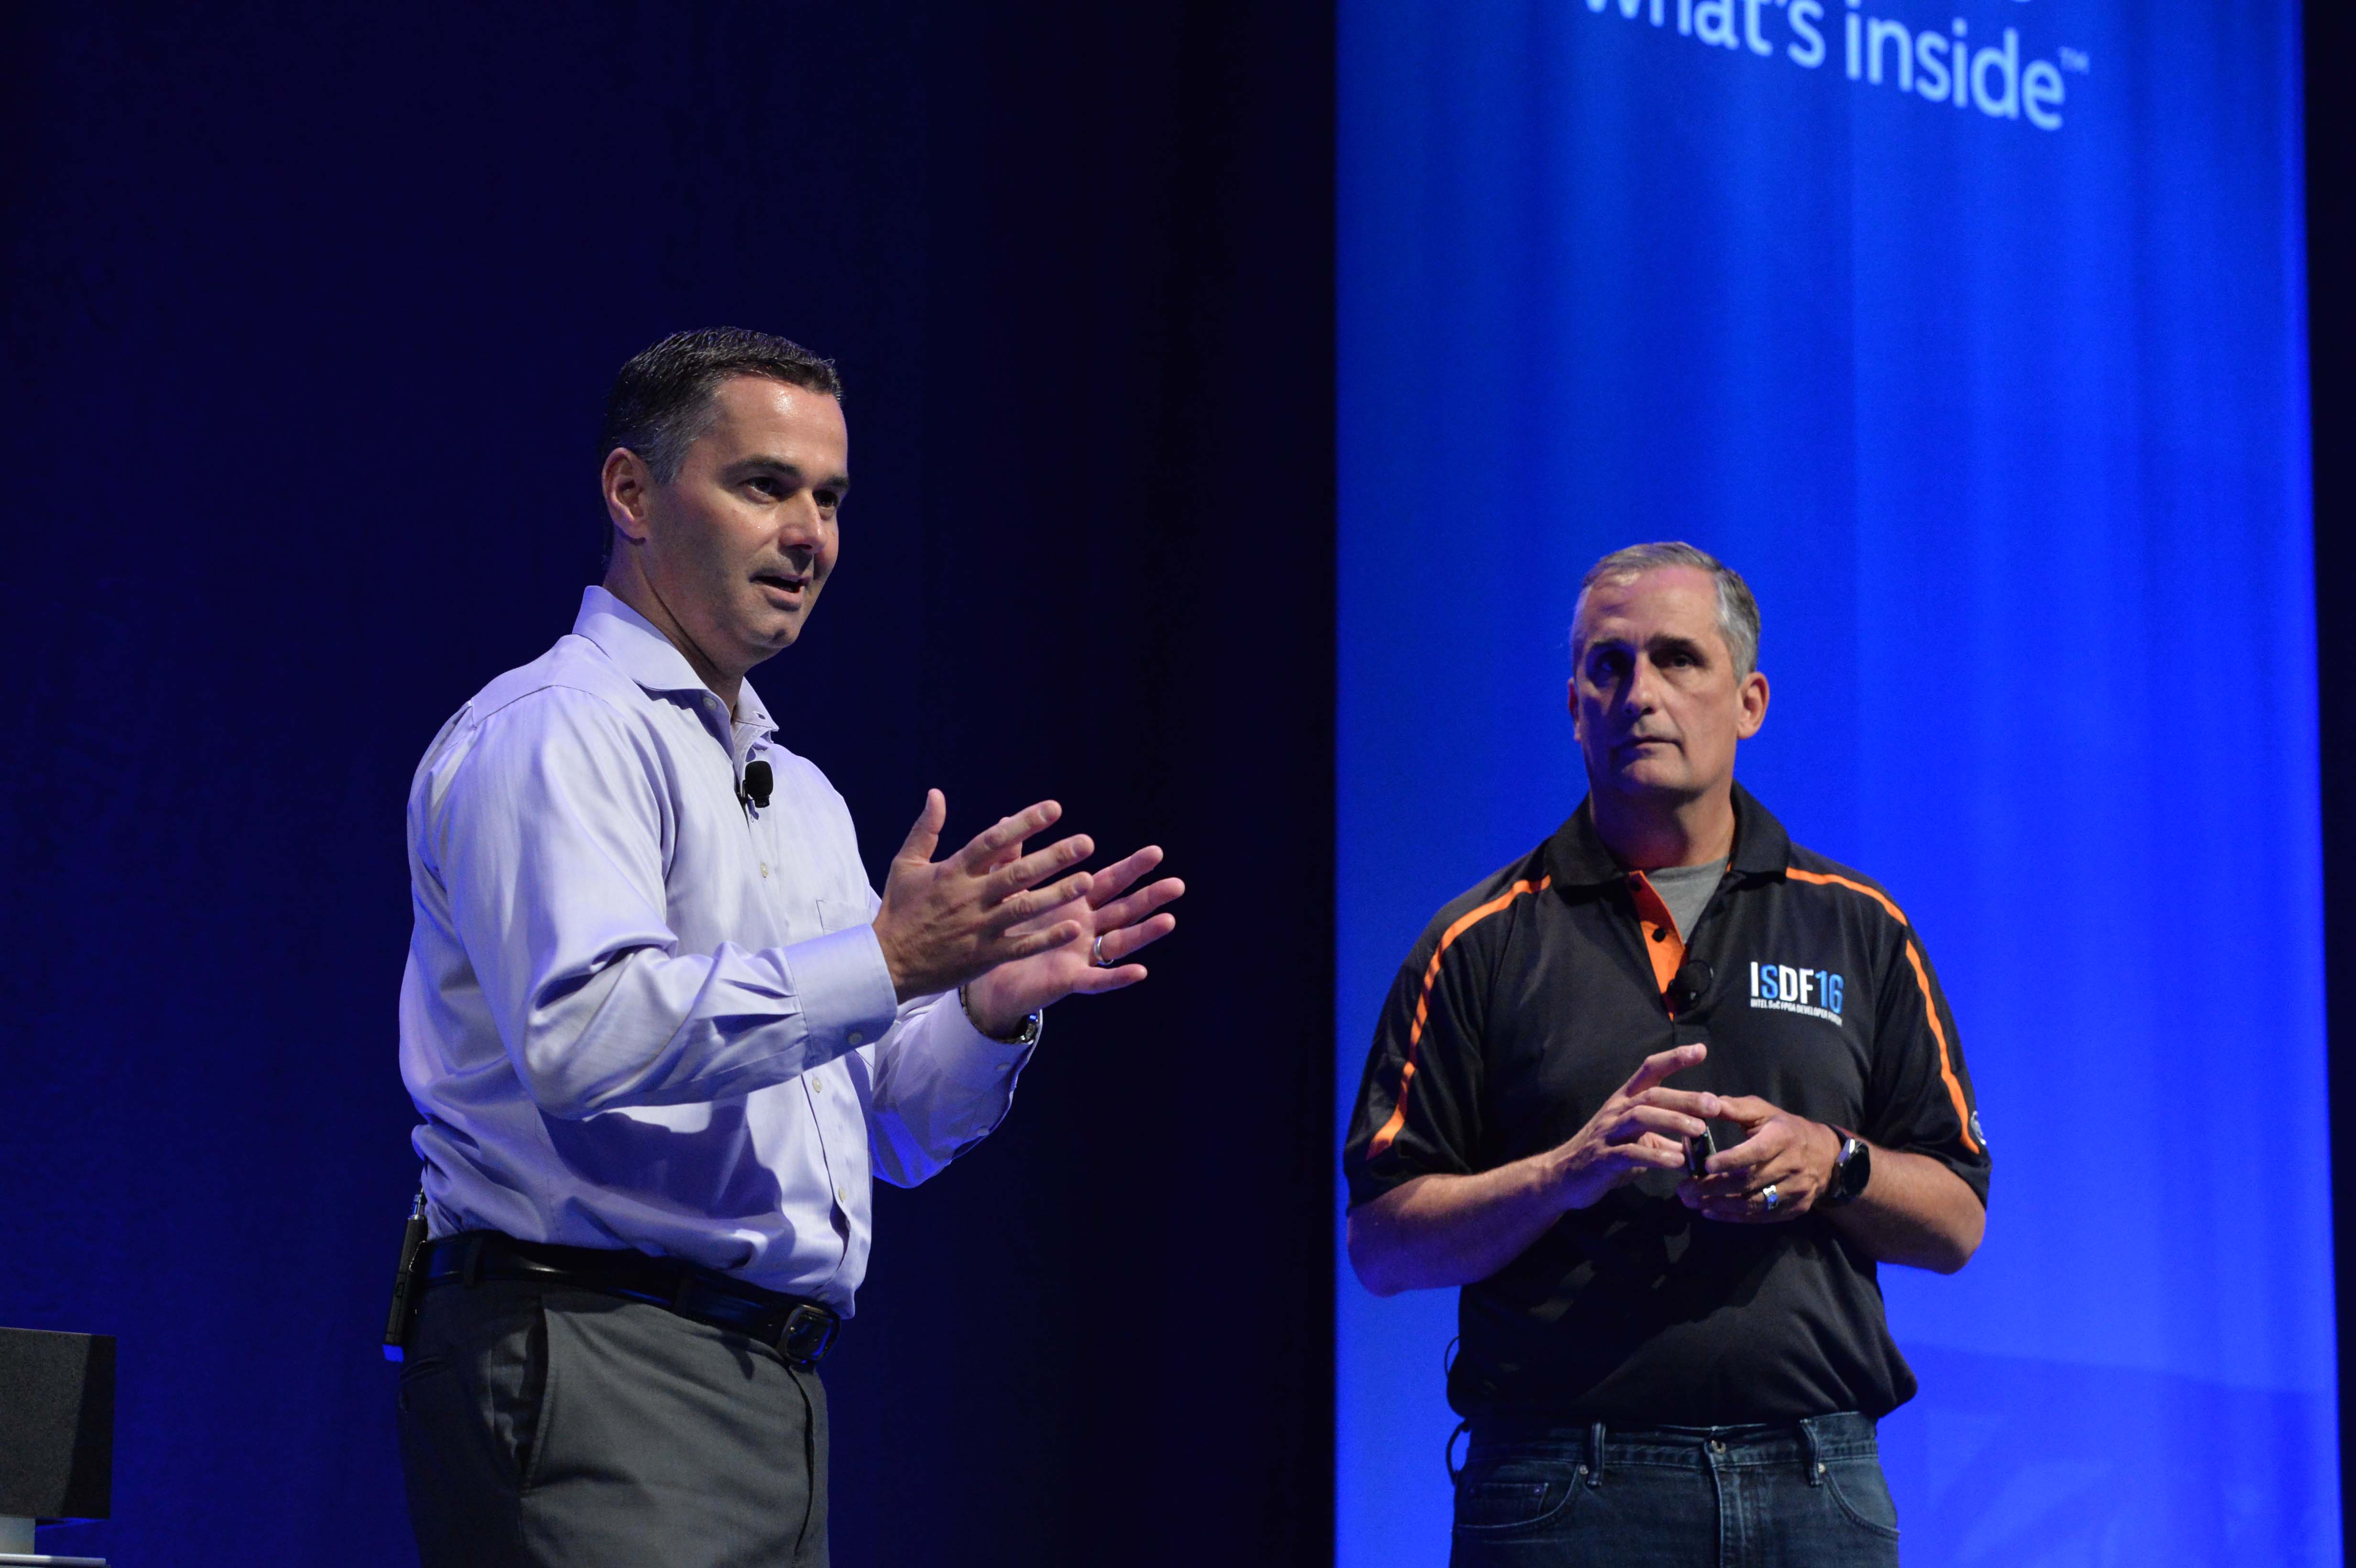 Brian Krzanich, Intel chief executive officer, and Dan McNamara (left), corporate vice president and general manager of Intel?s Programmable Solutions Group, address the audience at the inaugural Intel SoC FPGA Developer Forum in San Francisco on Thursday, Aug. 18, 2016. (Credit: Intel Corporation)